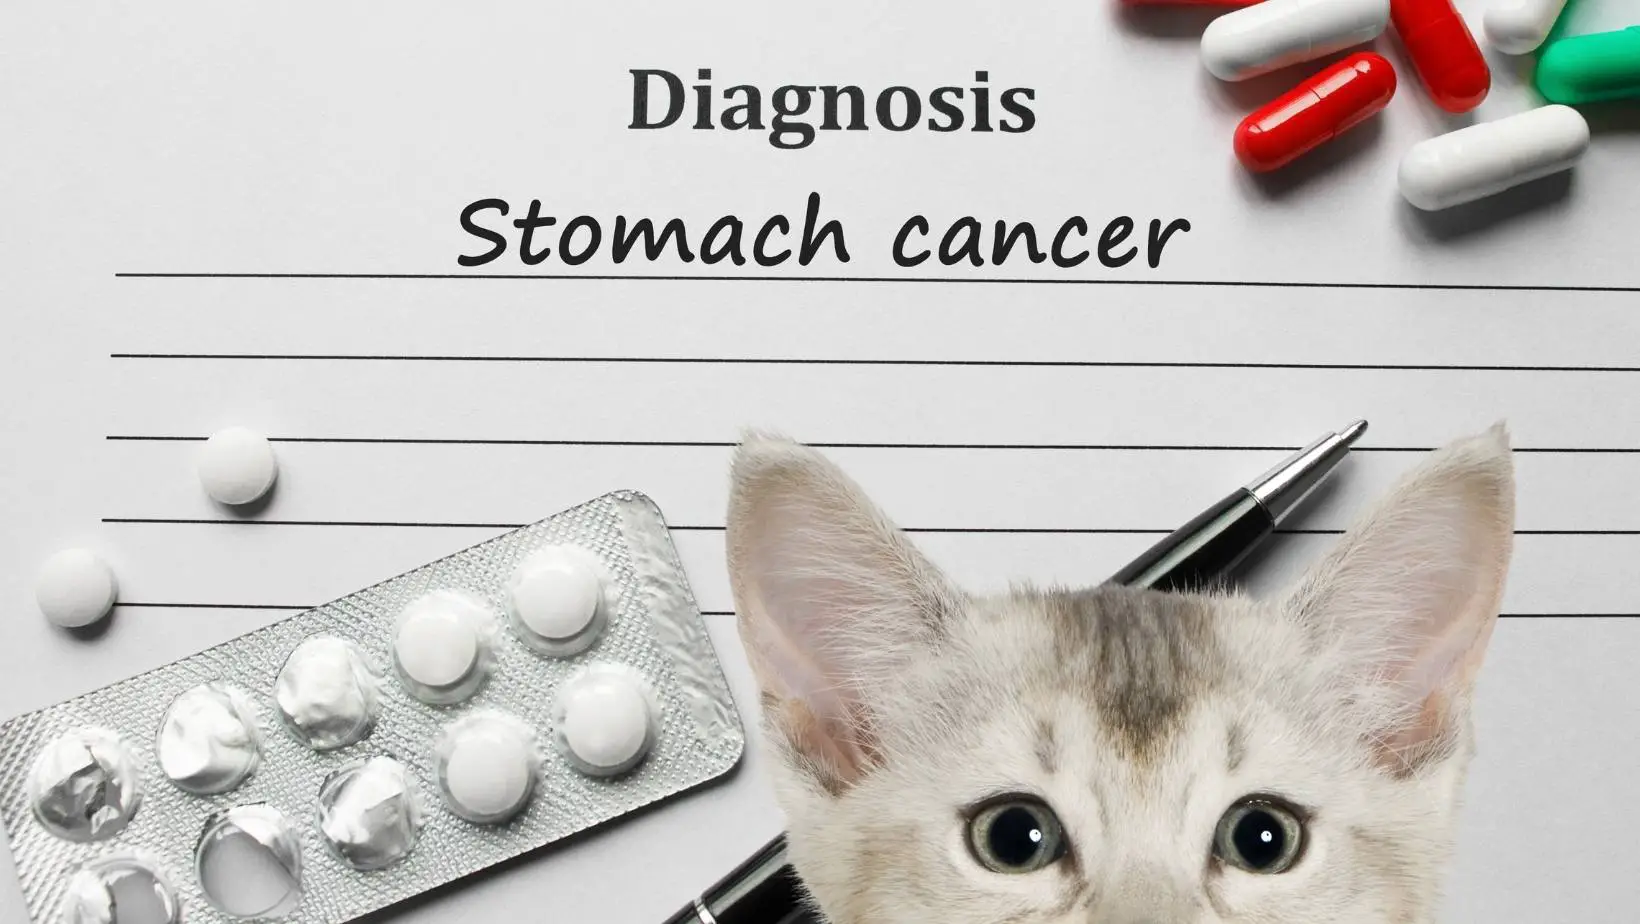 Can Cat Scan Detect Stomach Cancer?